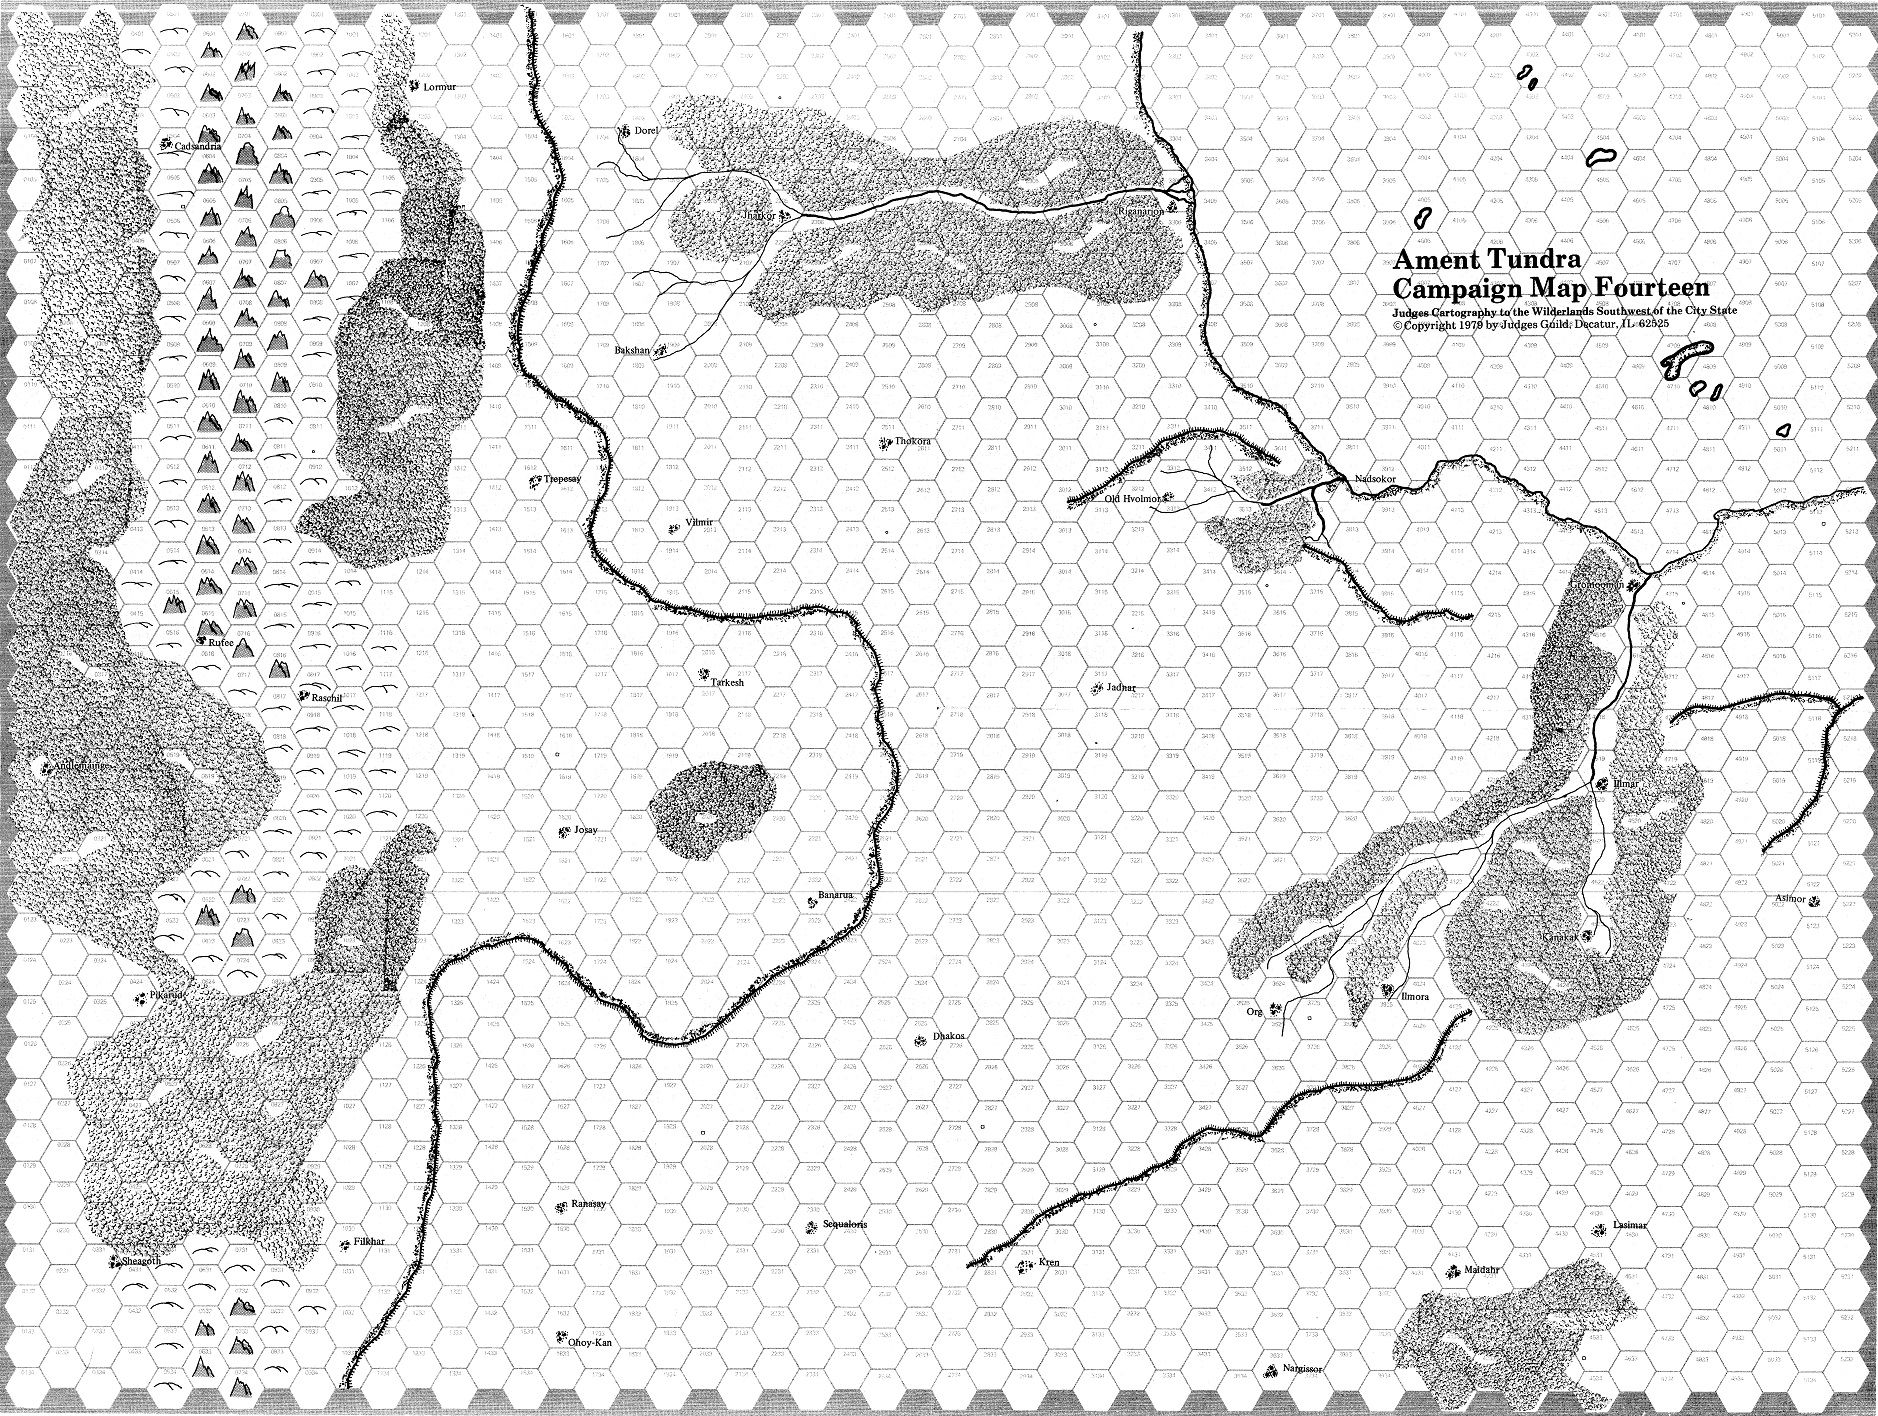 Image - Campaign Map 14